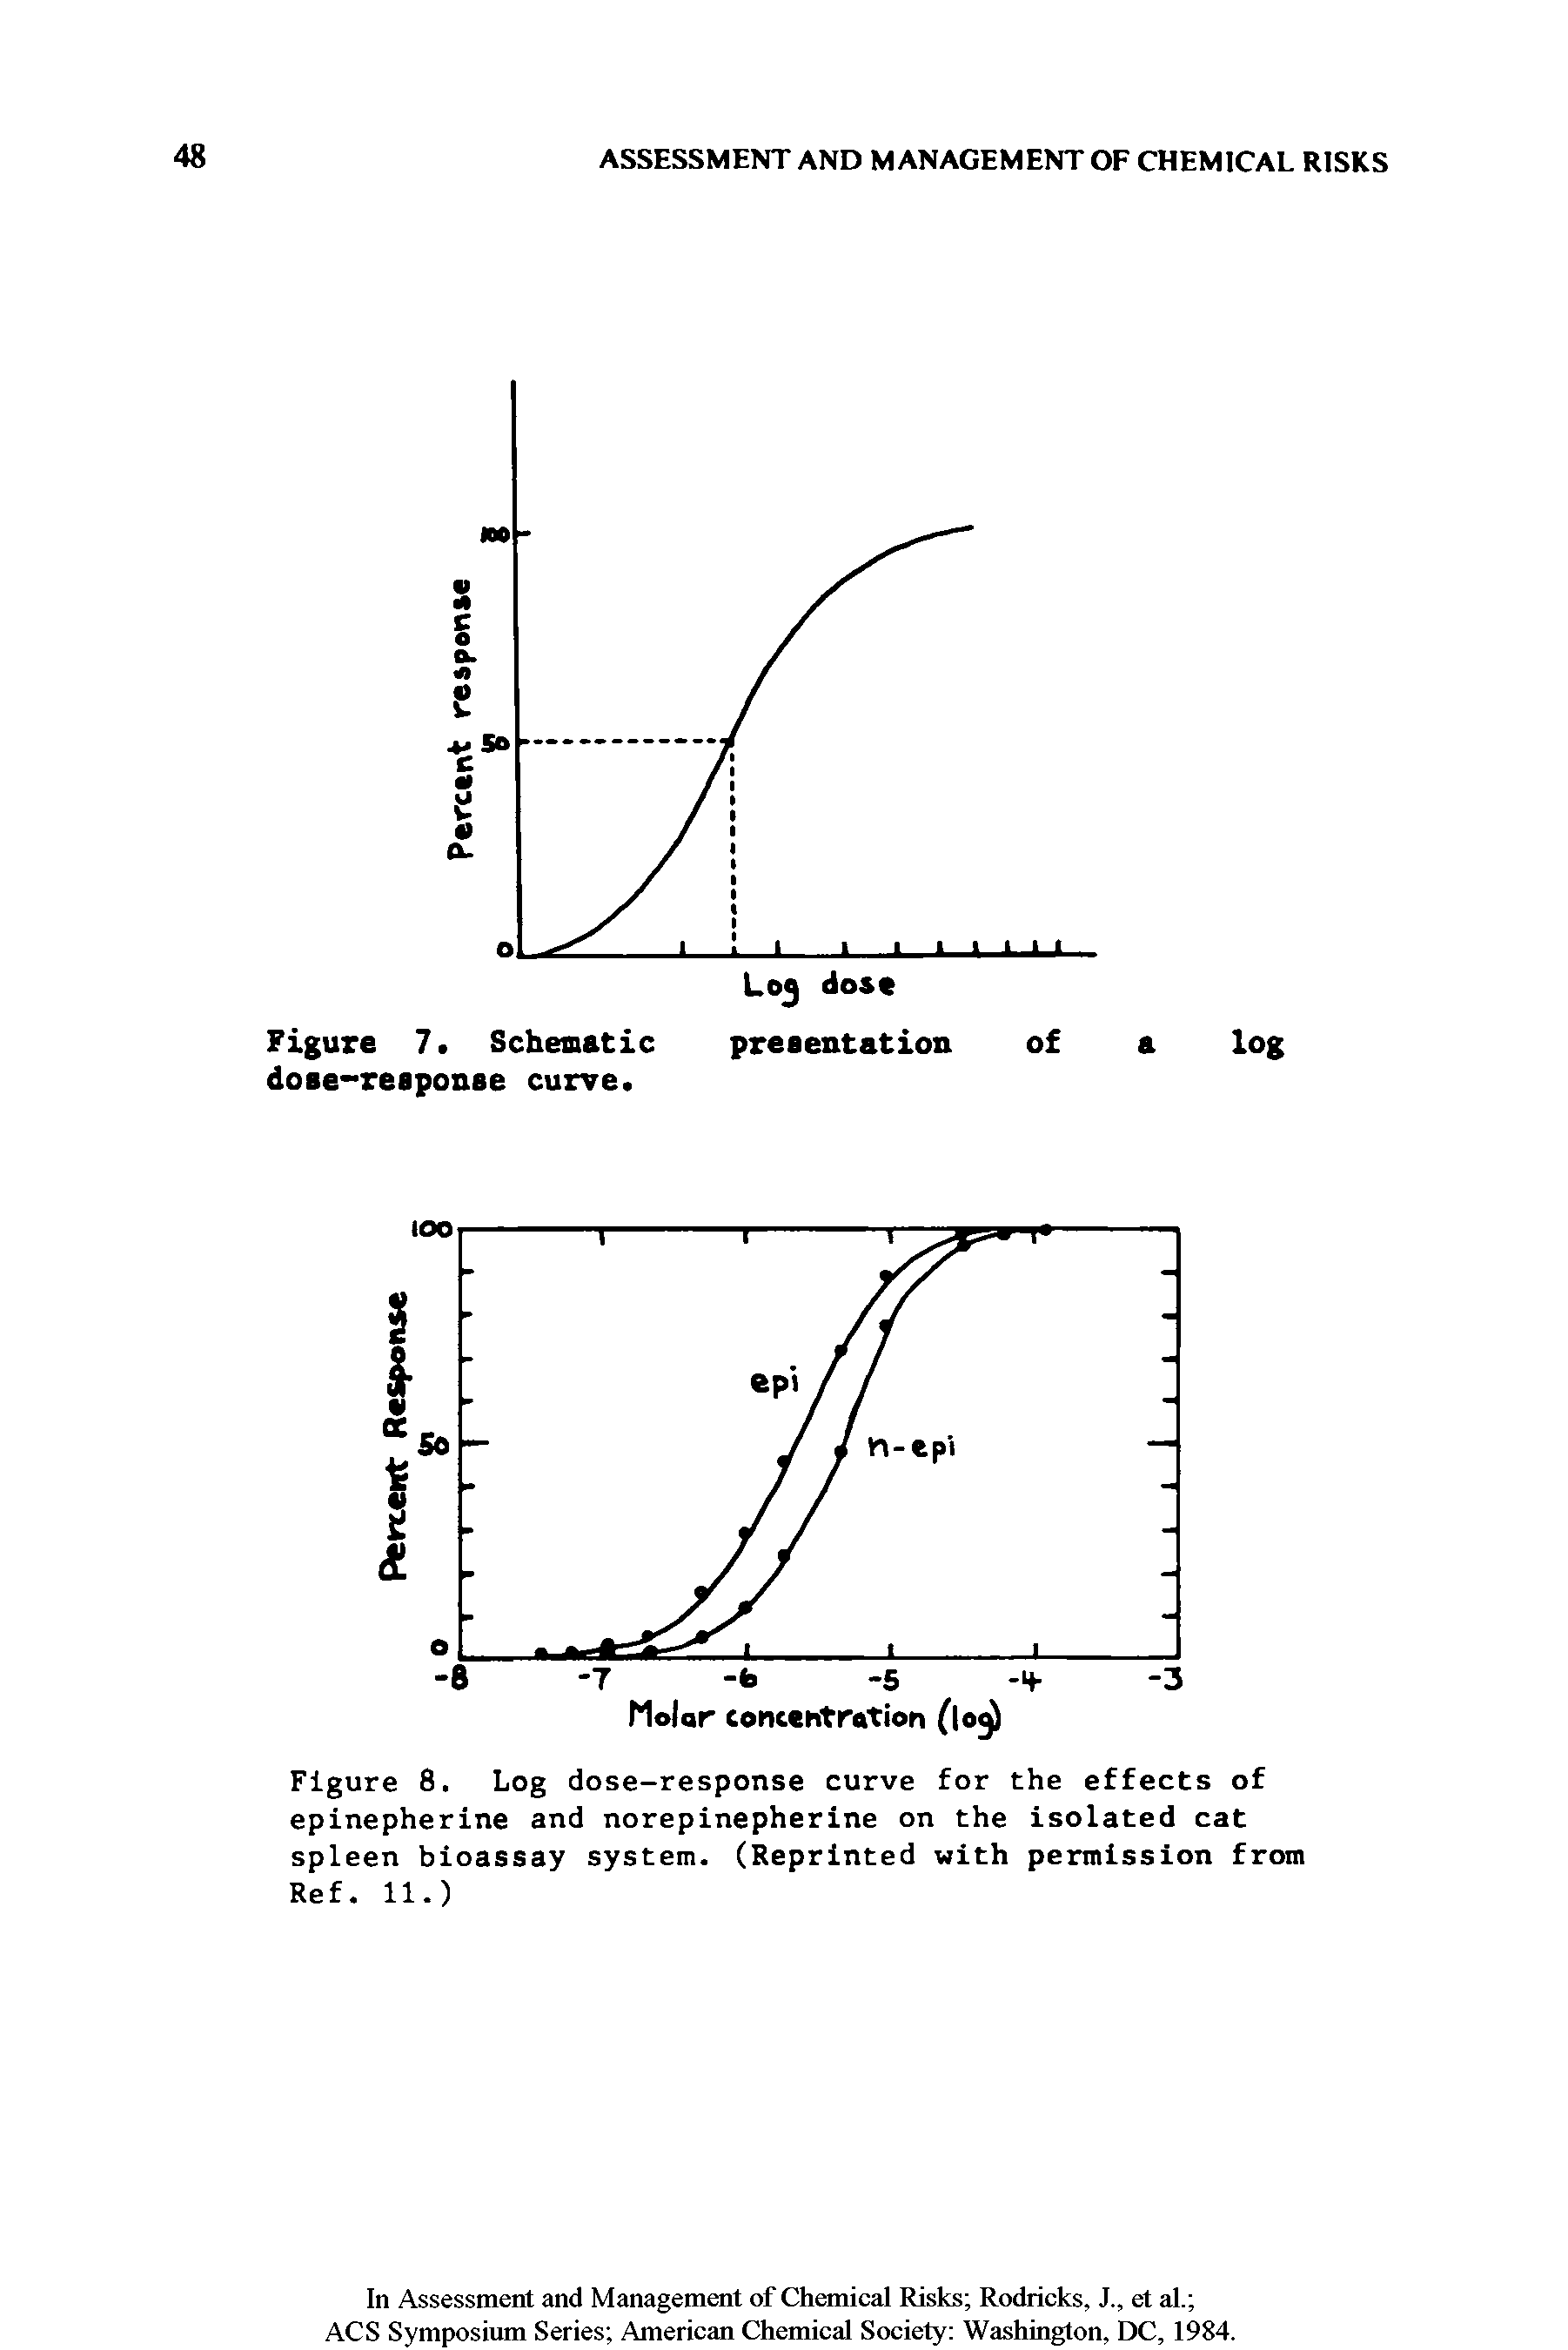 Figure 8. Log dose-response curve for the effects of epinepherine and norepinepherine on the isolated cat spleen bioassay system. (Reprinted with permission from Ref. 11.)...